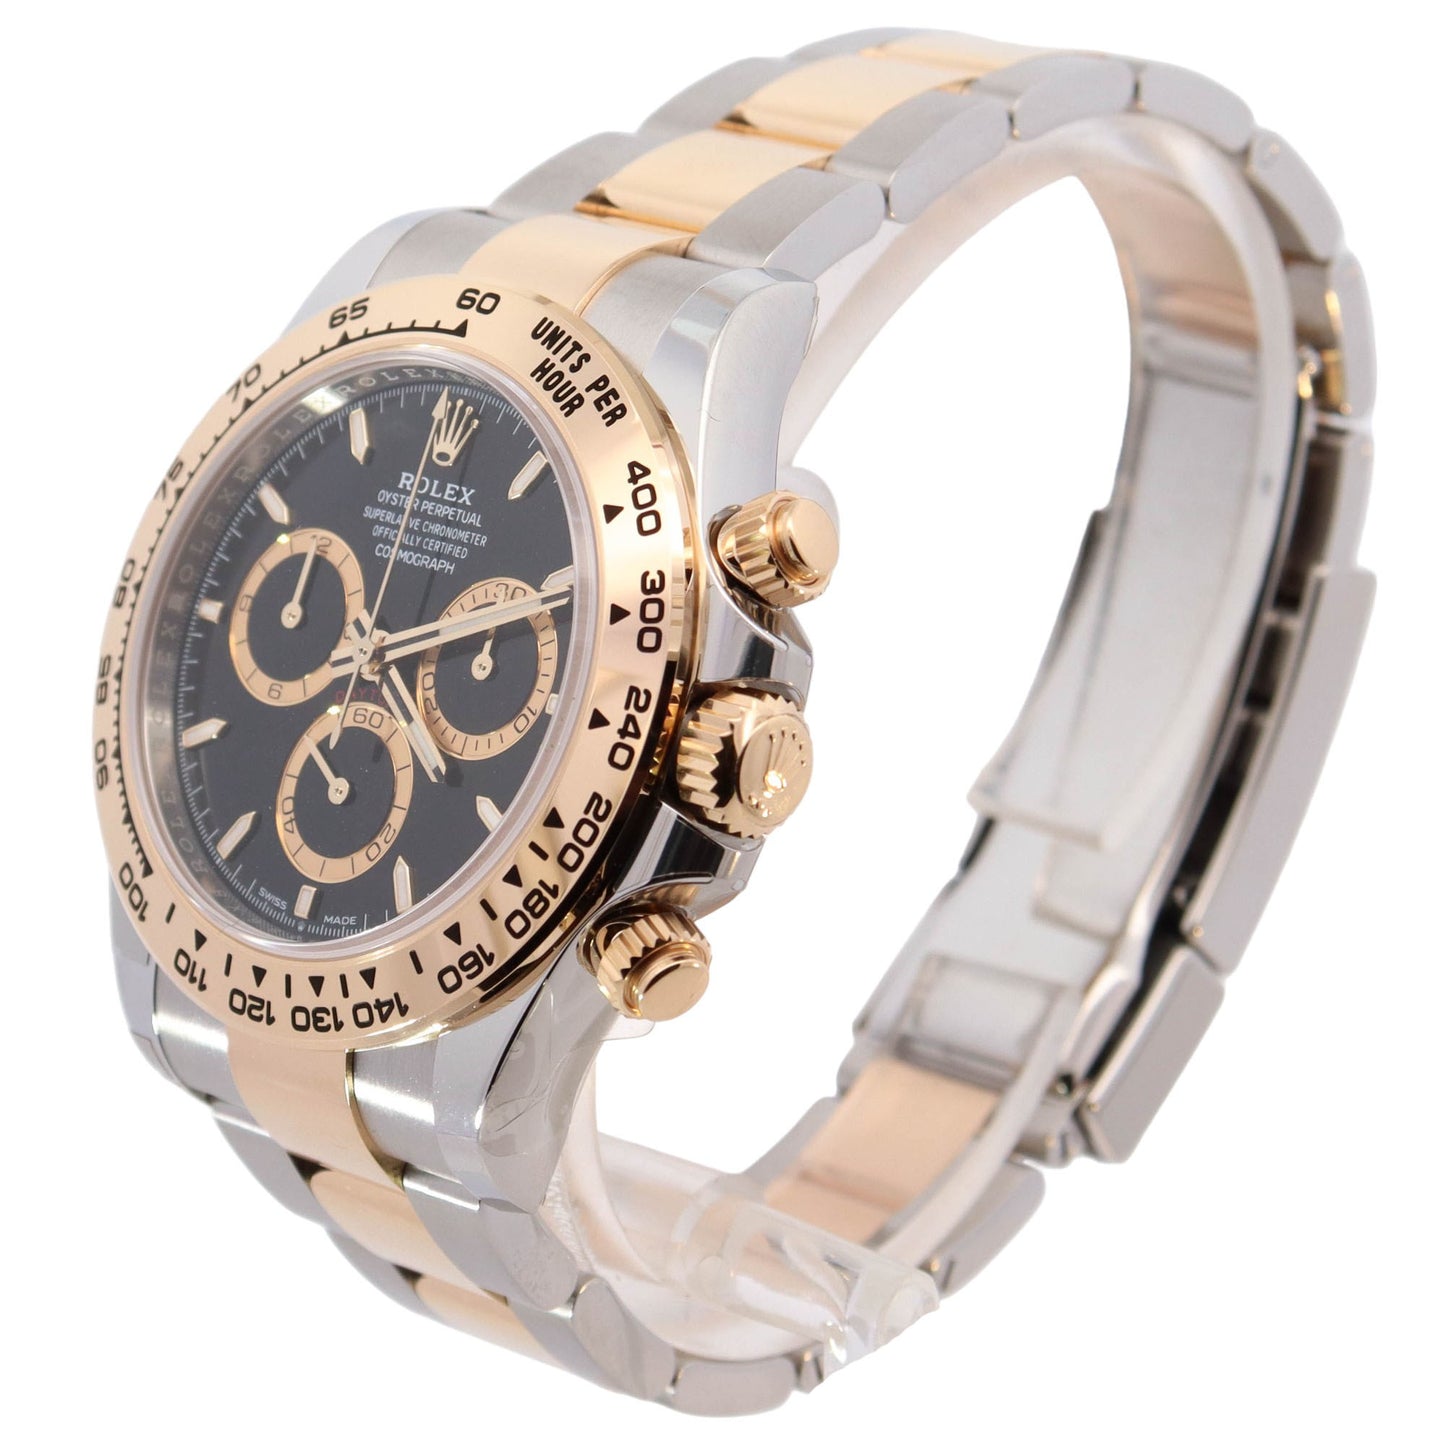 Rolex Daytona Two-Tone Stainless Steel & Yellow Gold 40mm Black Stick Dial Watch Reference# 126503